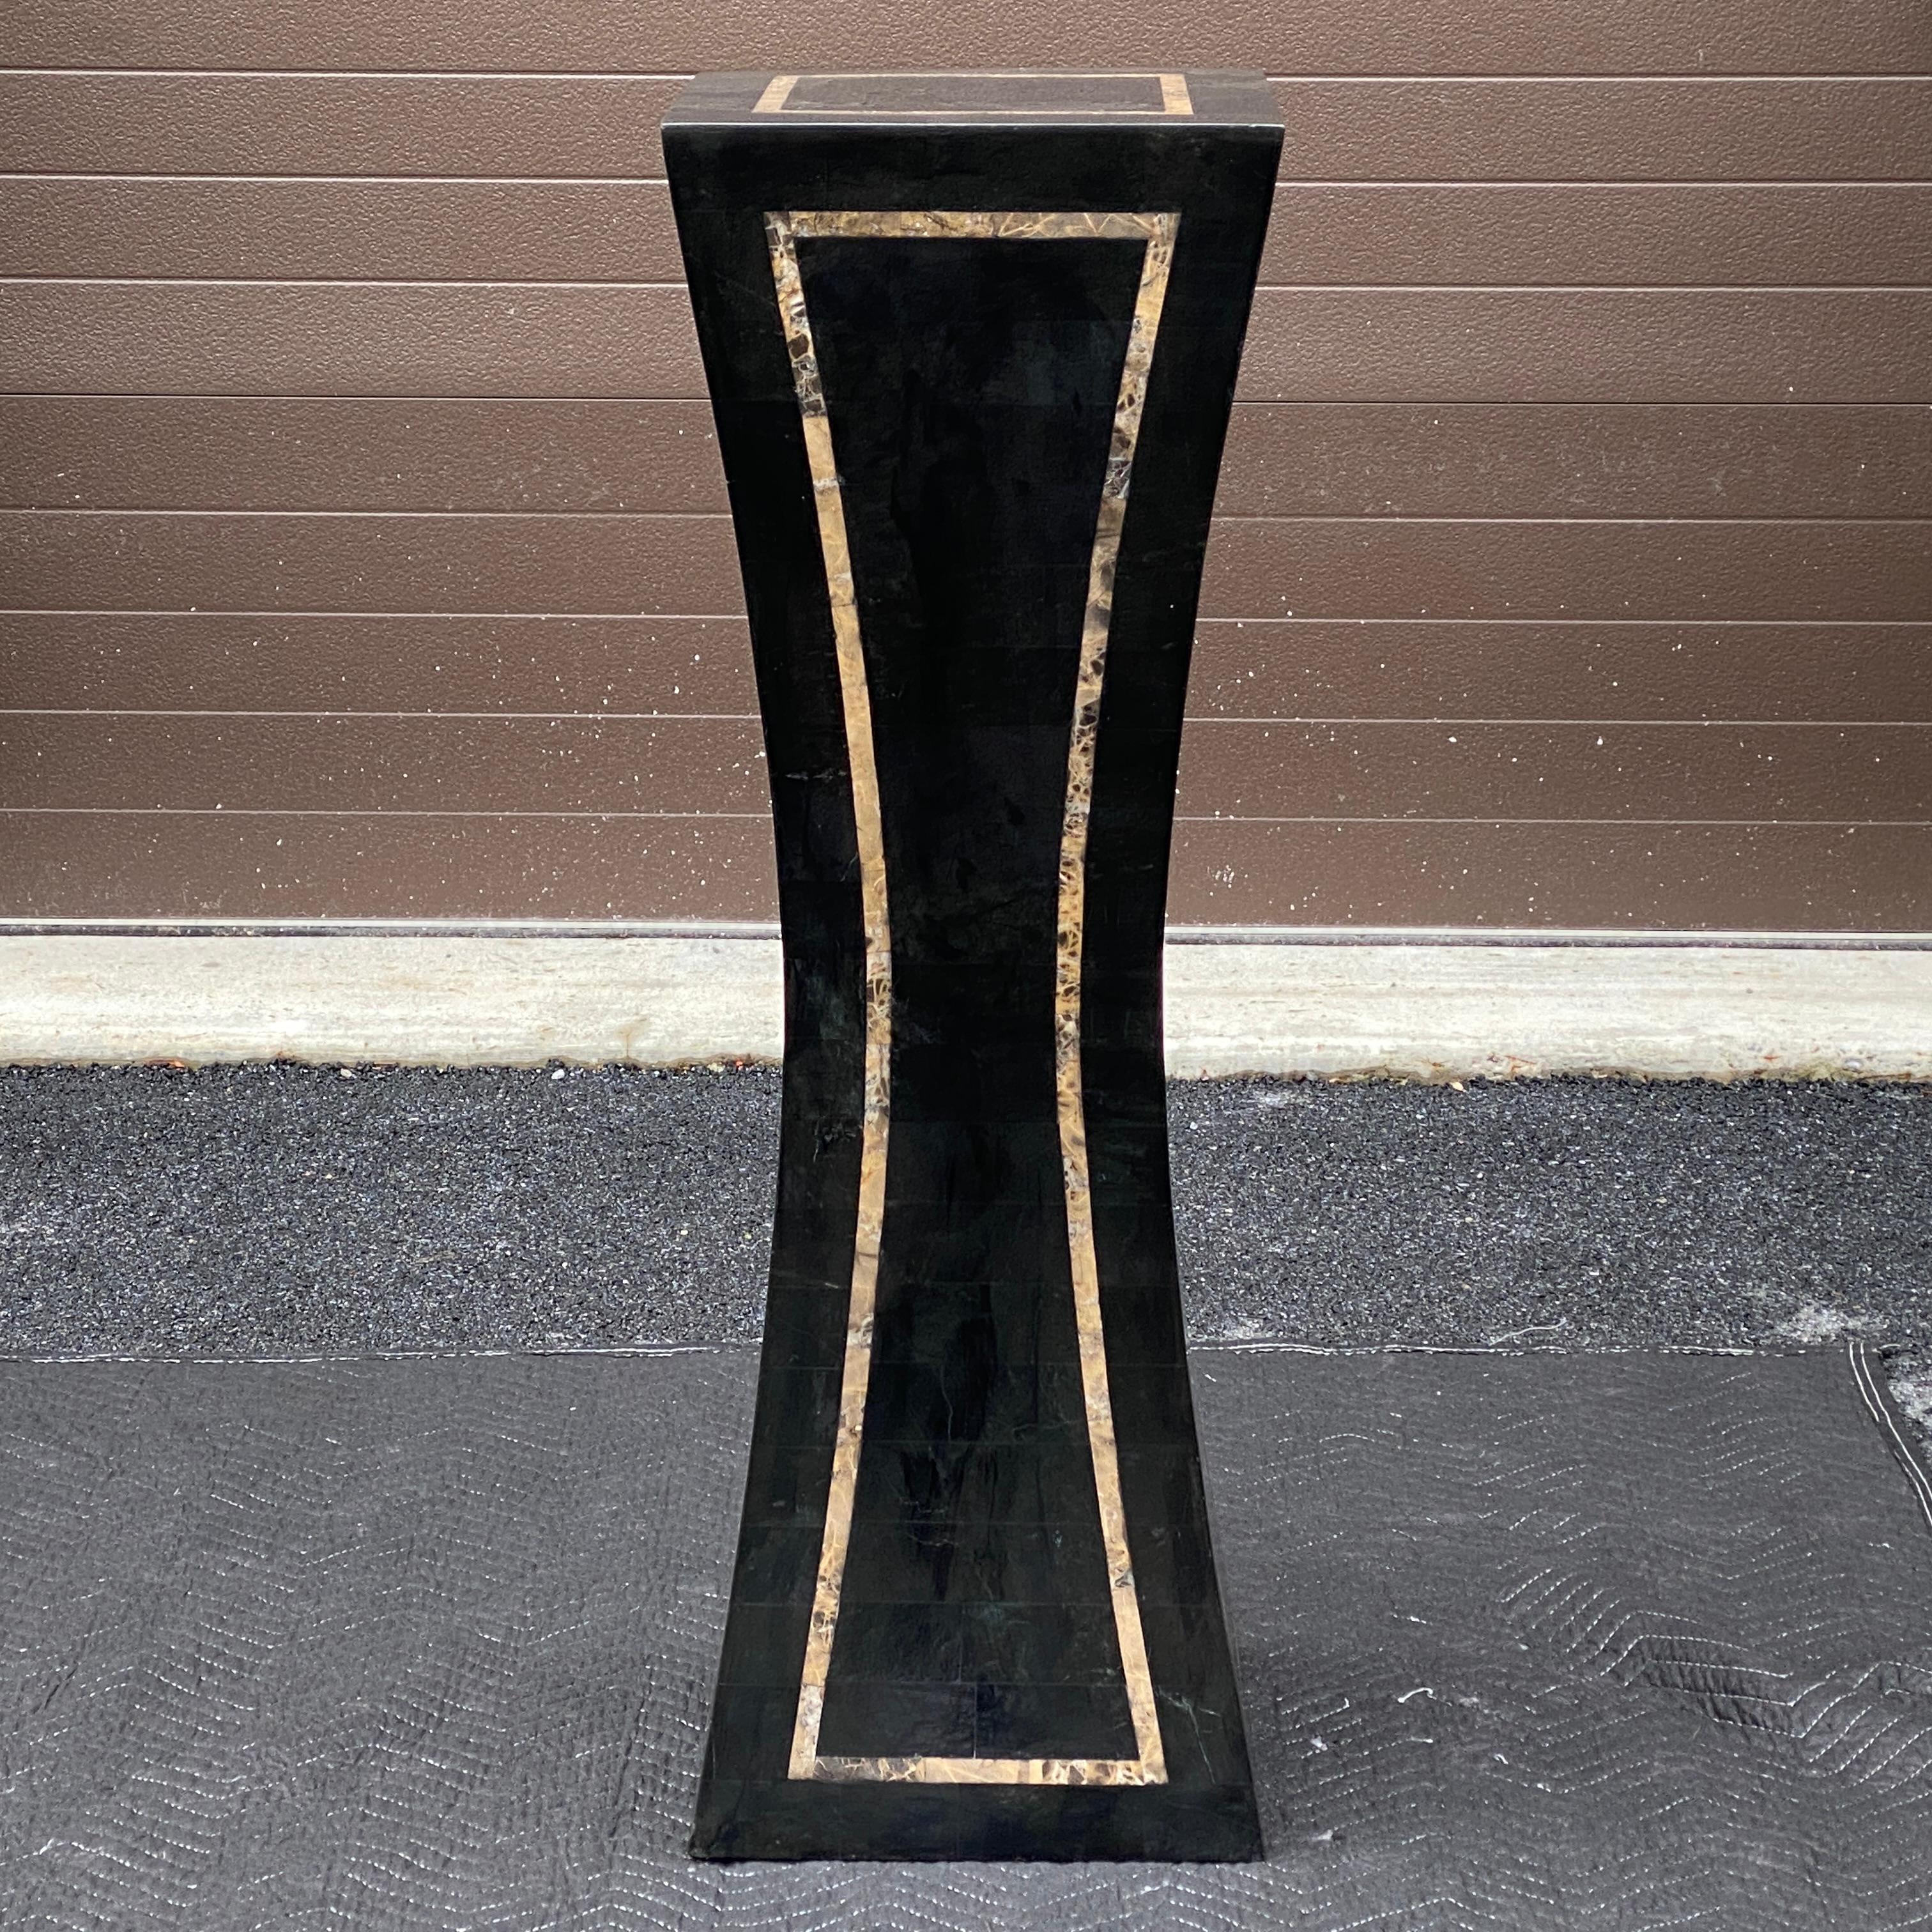 A vintage tessellated marble pedestal circa 1980s unmarked. The main color appears almost black in many indoor settings however you see more of the green tones when looking at in in direct sunlight.